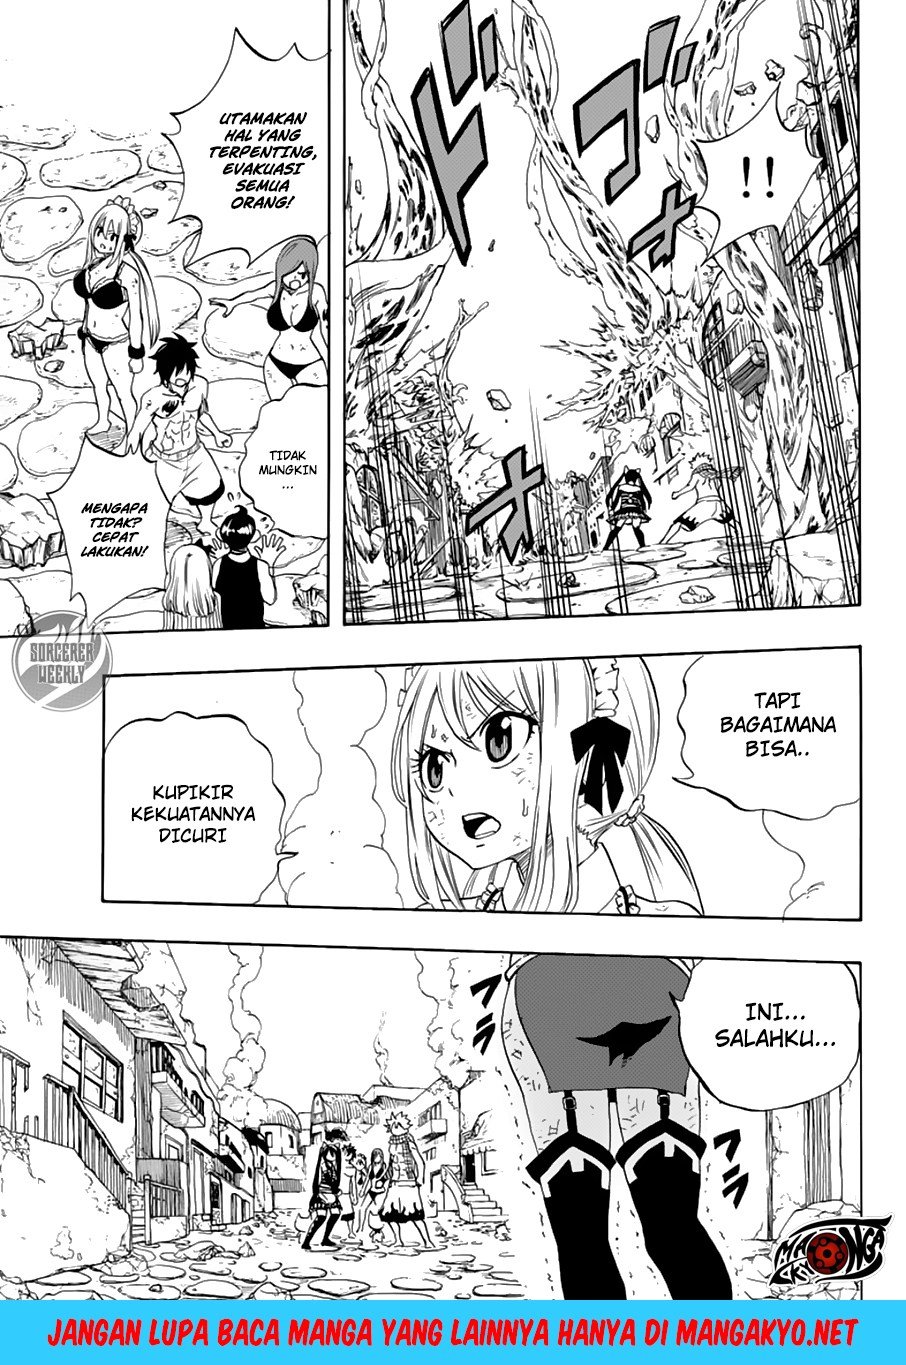 Fairy Tail: 100 Years Quest Chapter 17